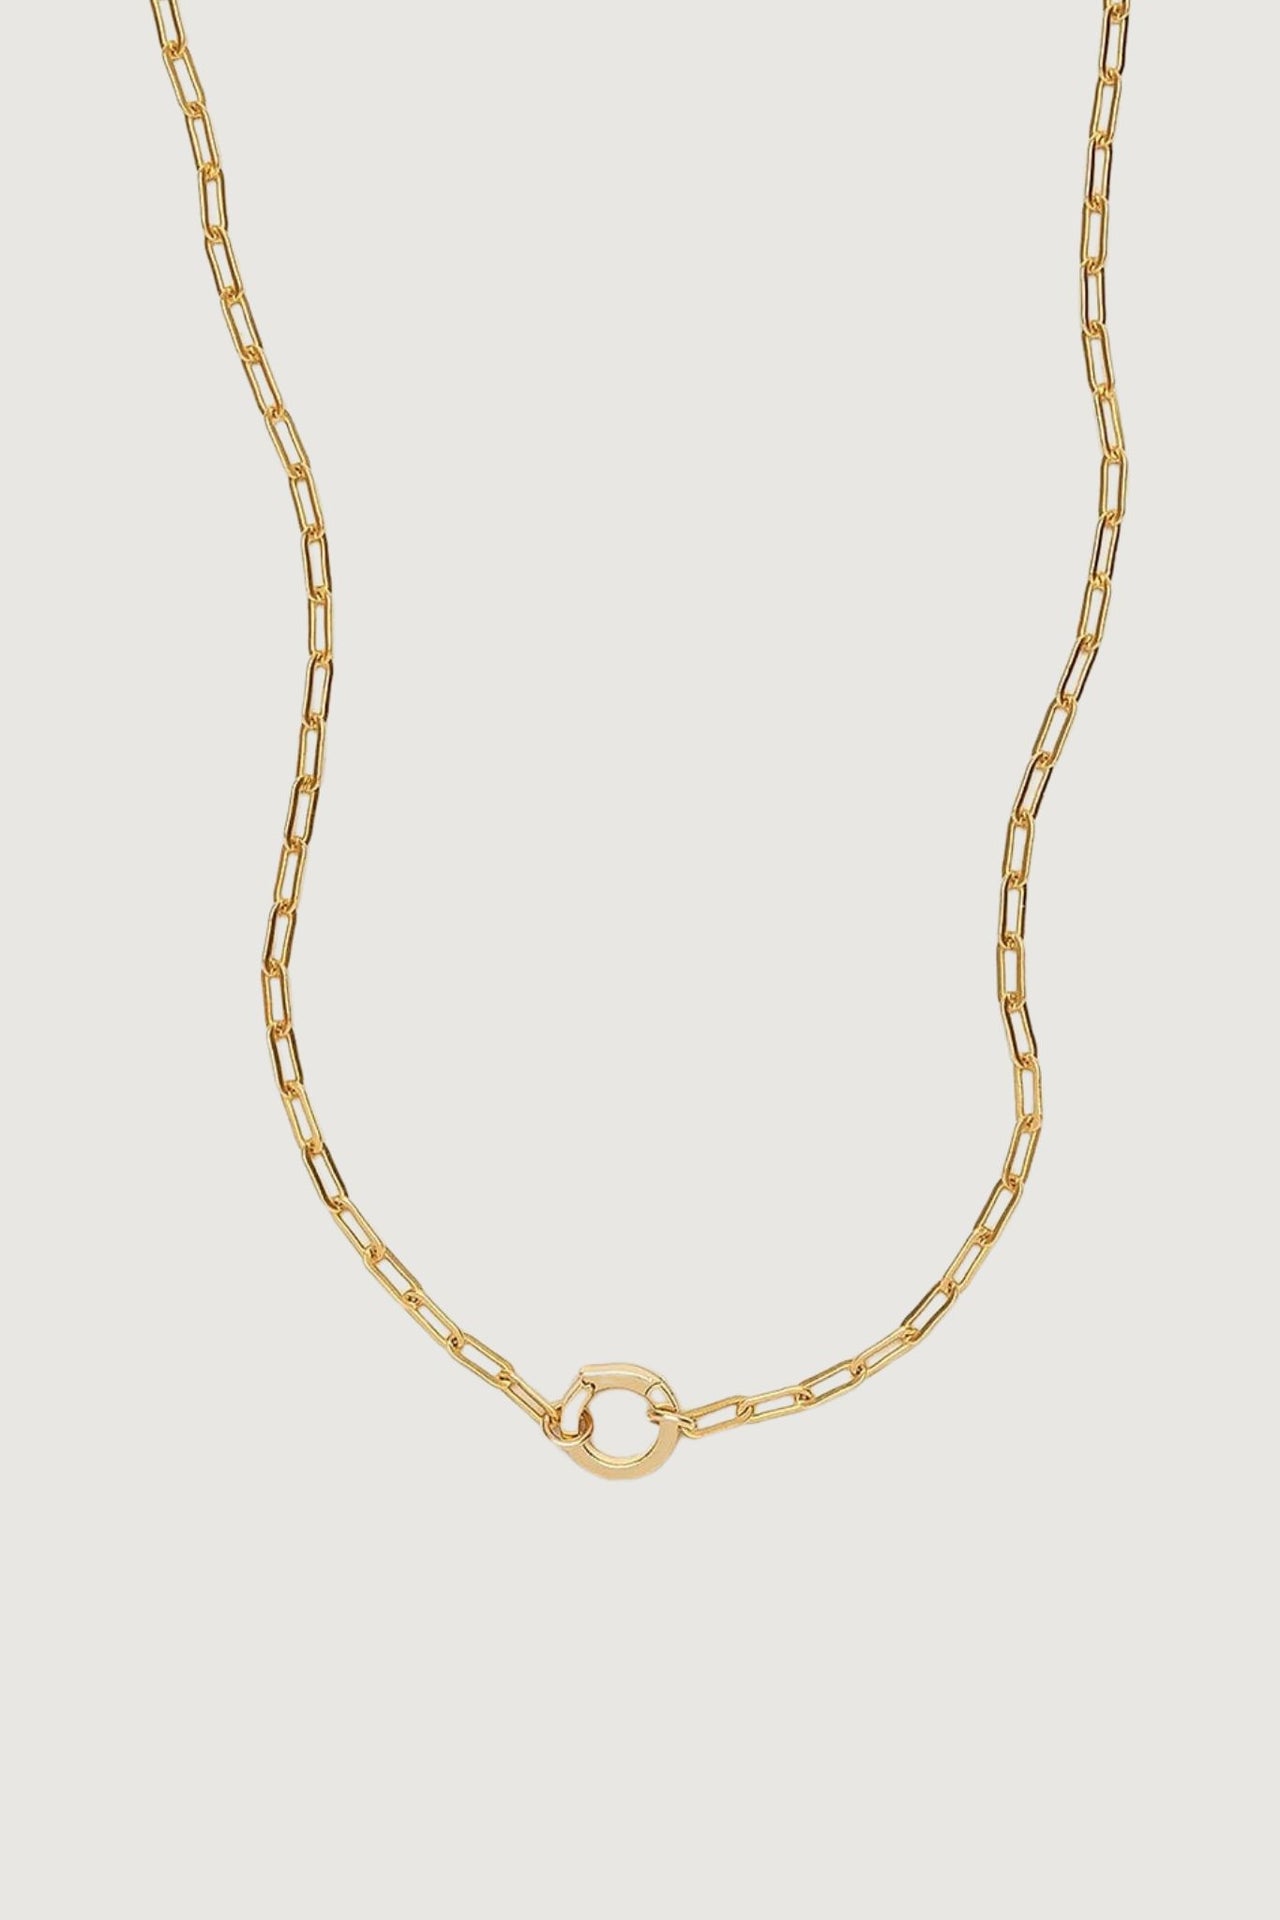 GOLD LINK CHAIN CHARM NECKLACE